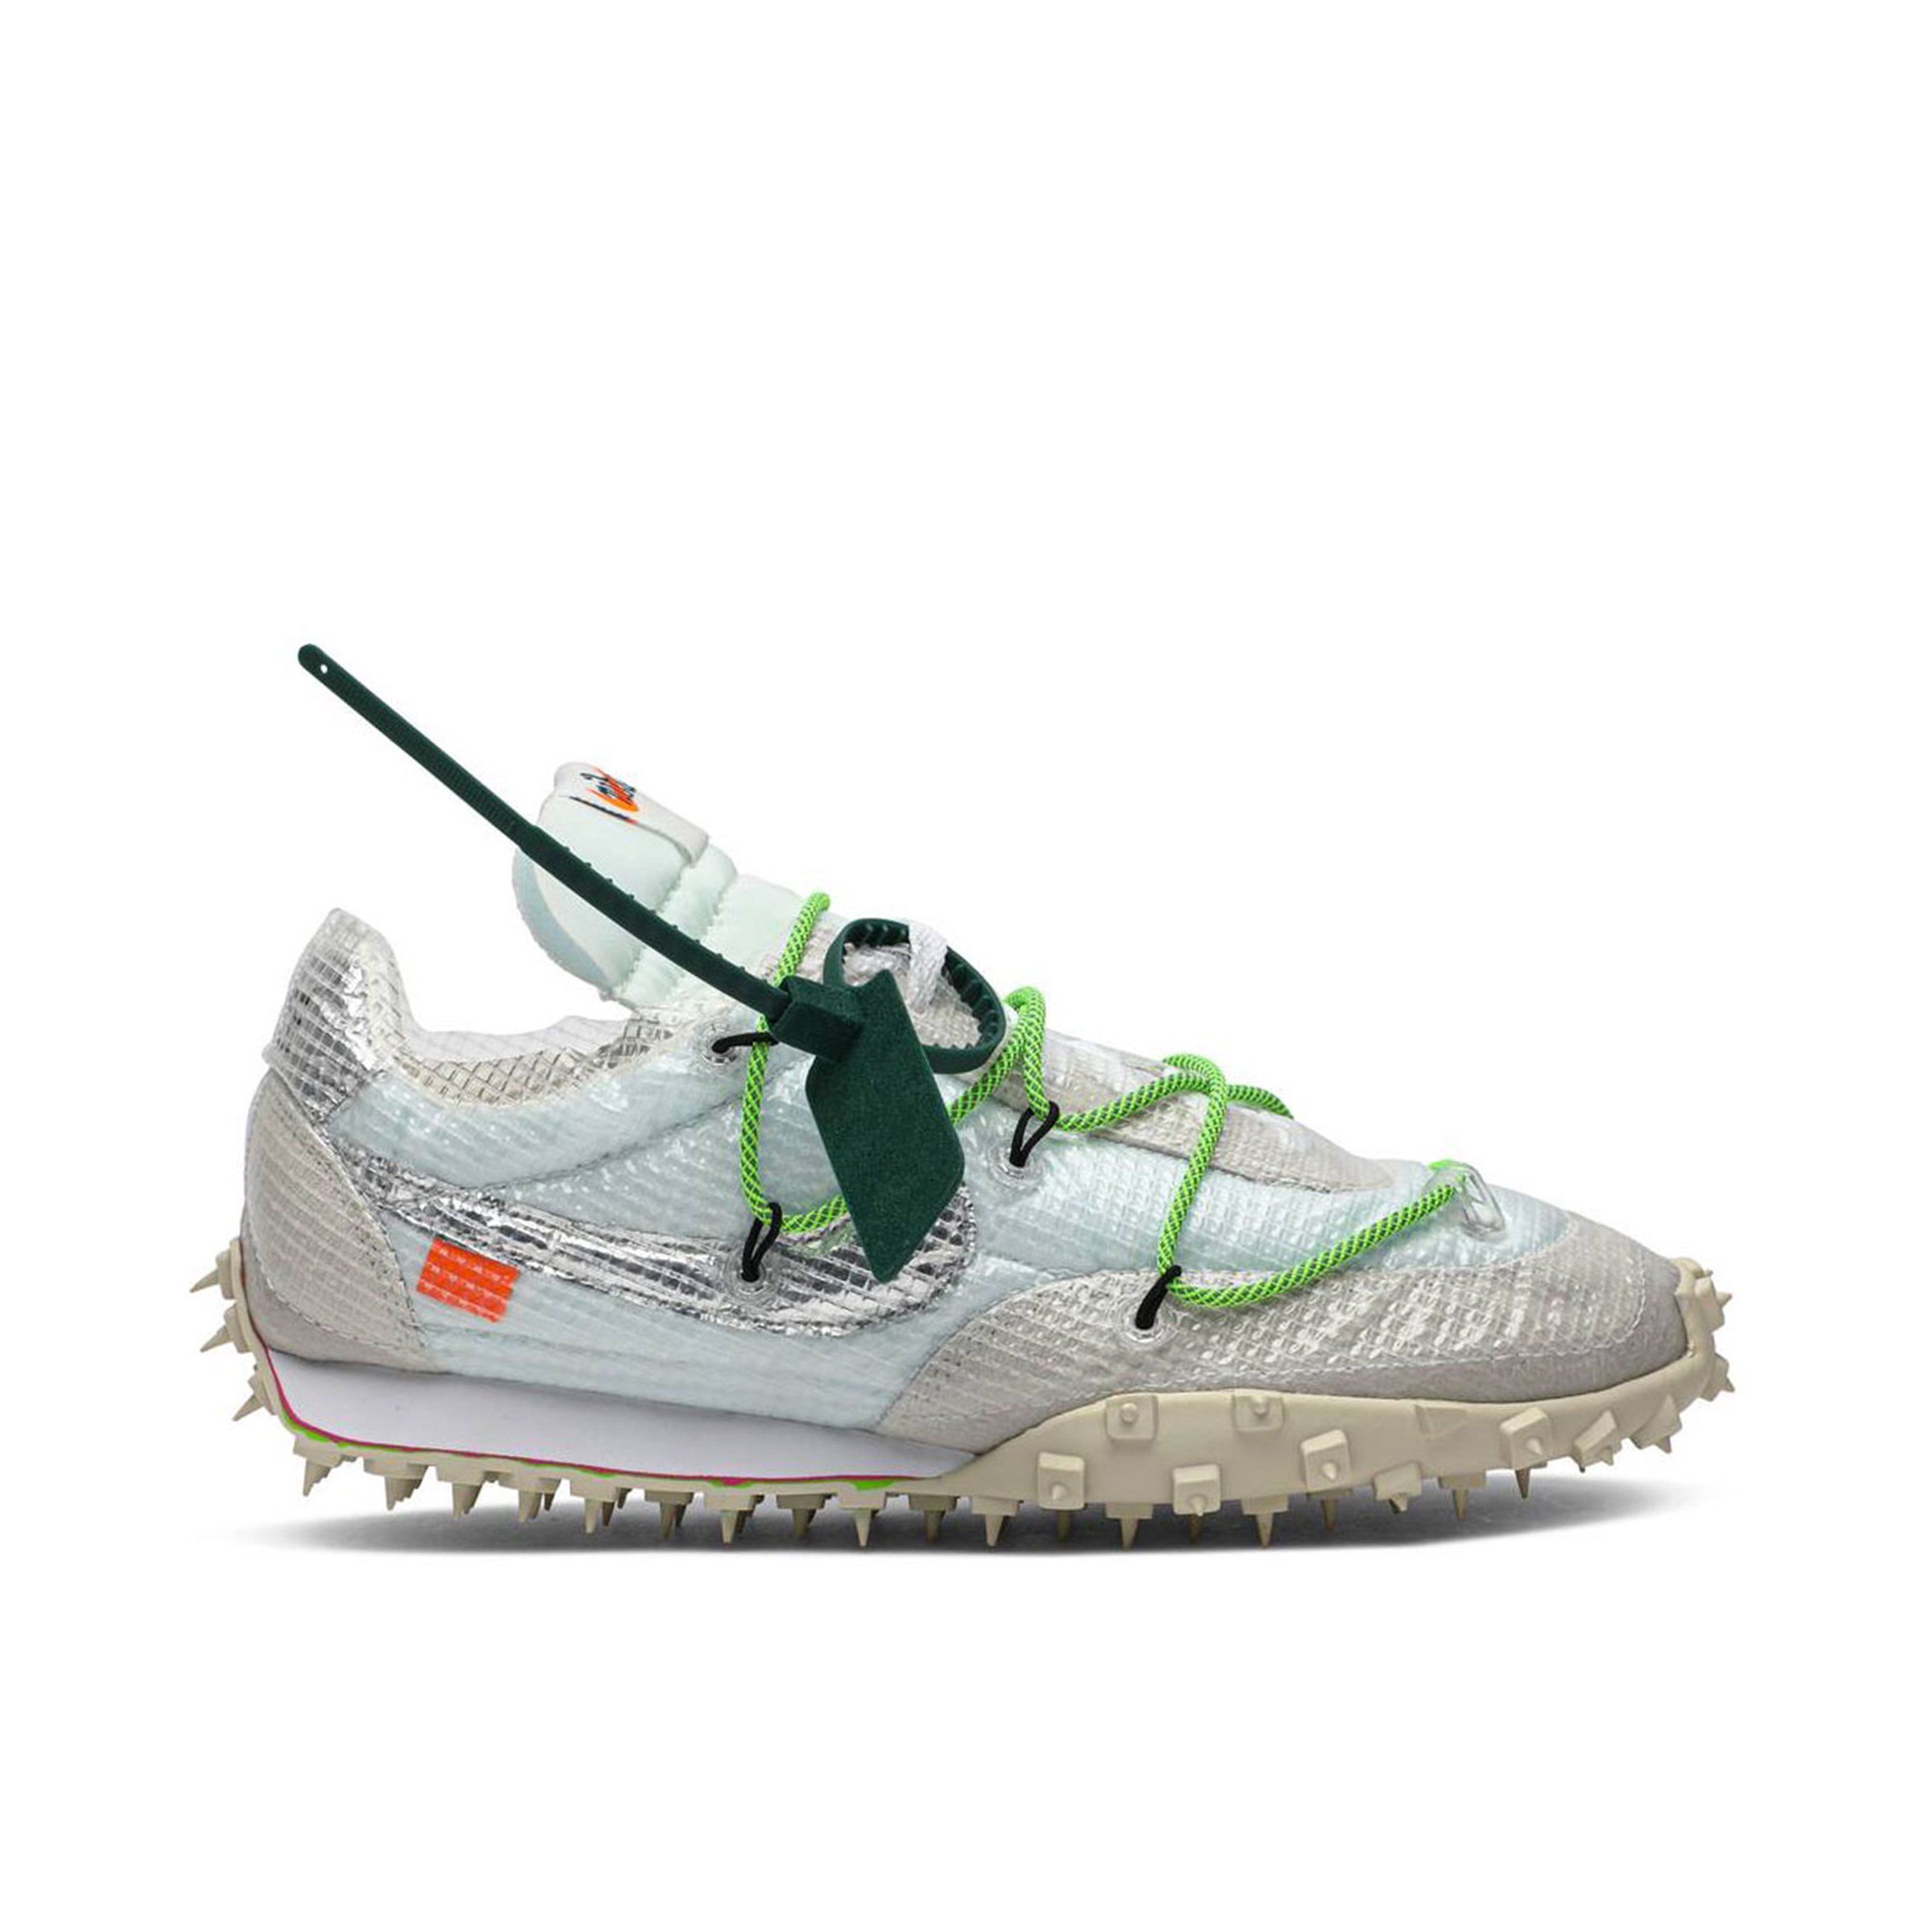 Off-White x Nike Waffle Racer 'Electric Green' | CD8180-100 | Laced